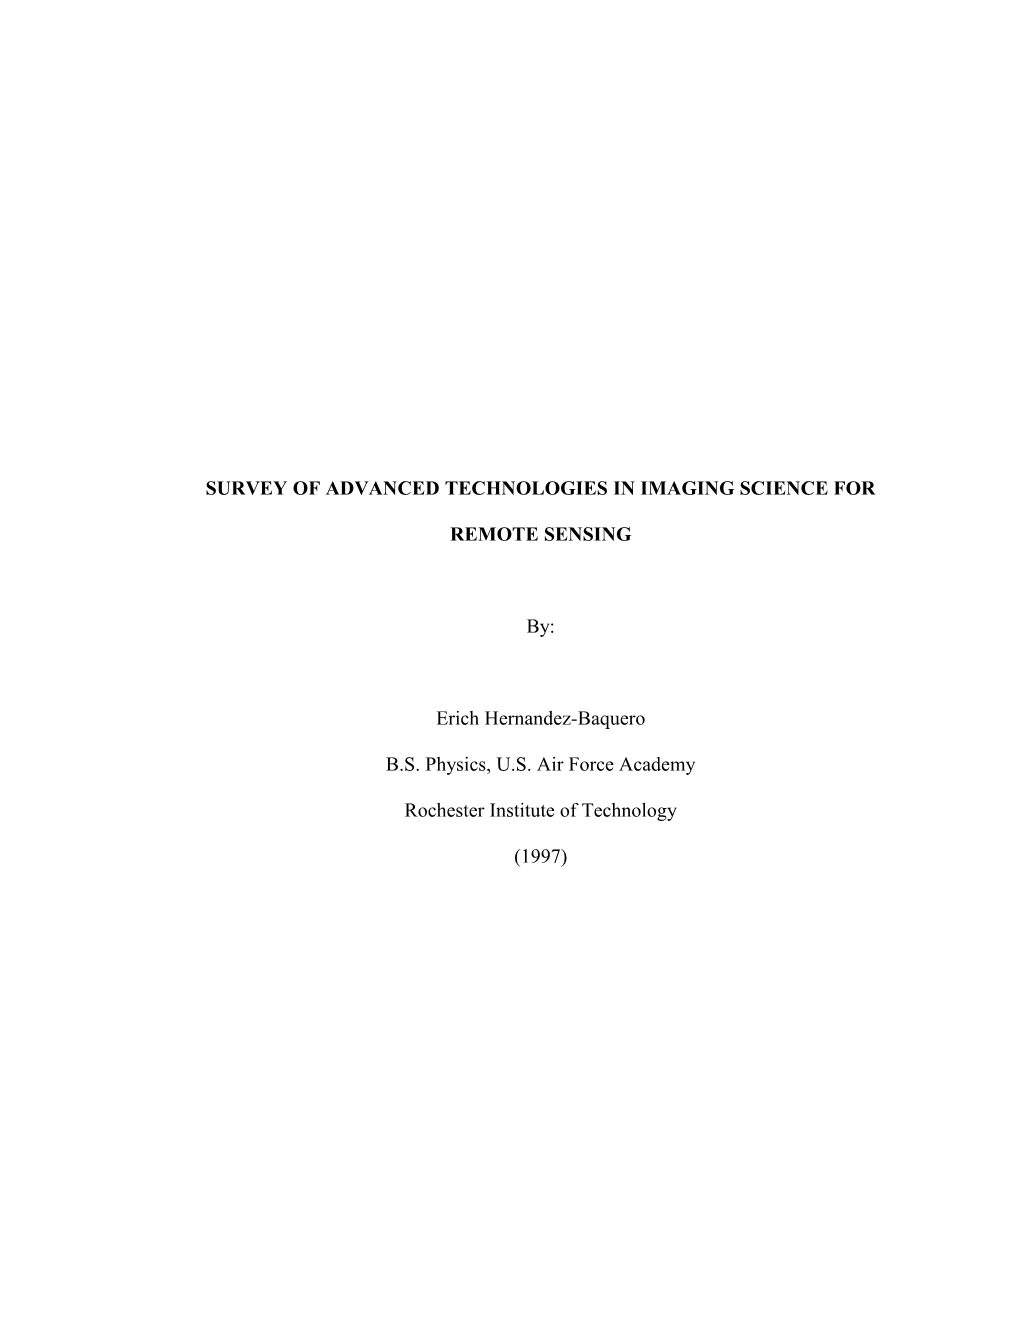 Survey of Advanced Technologies in Imaging Science for Remote Sensing